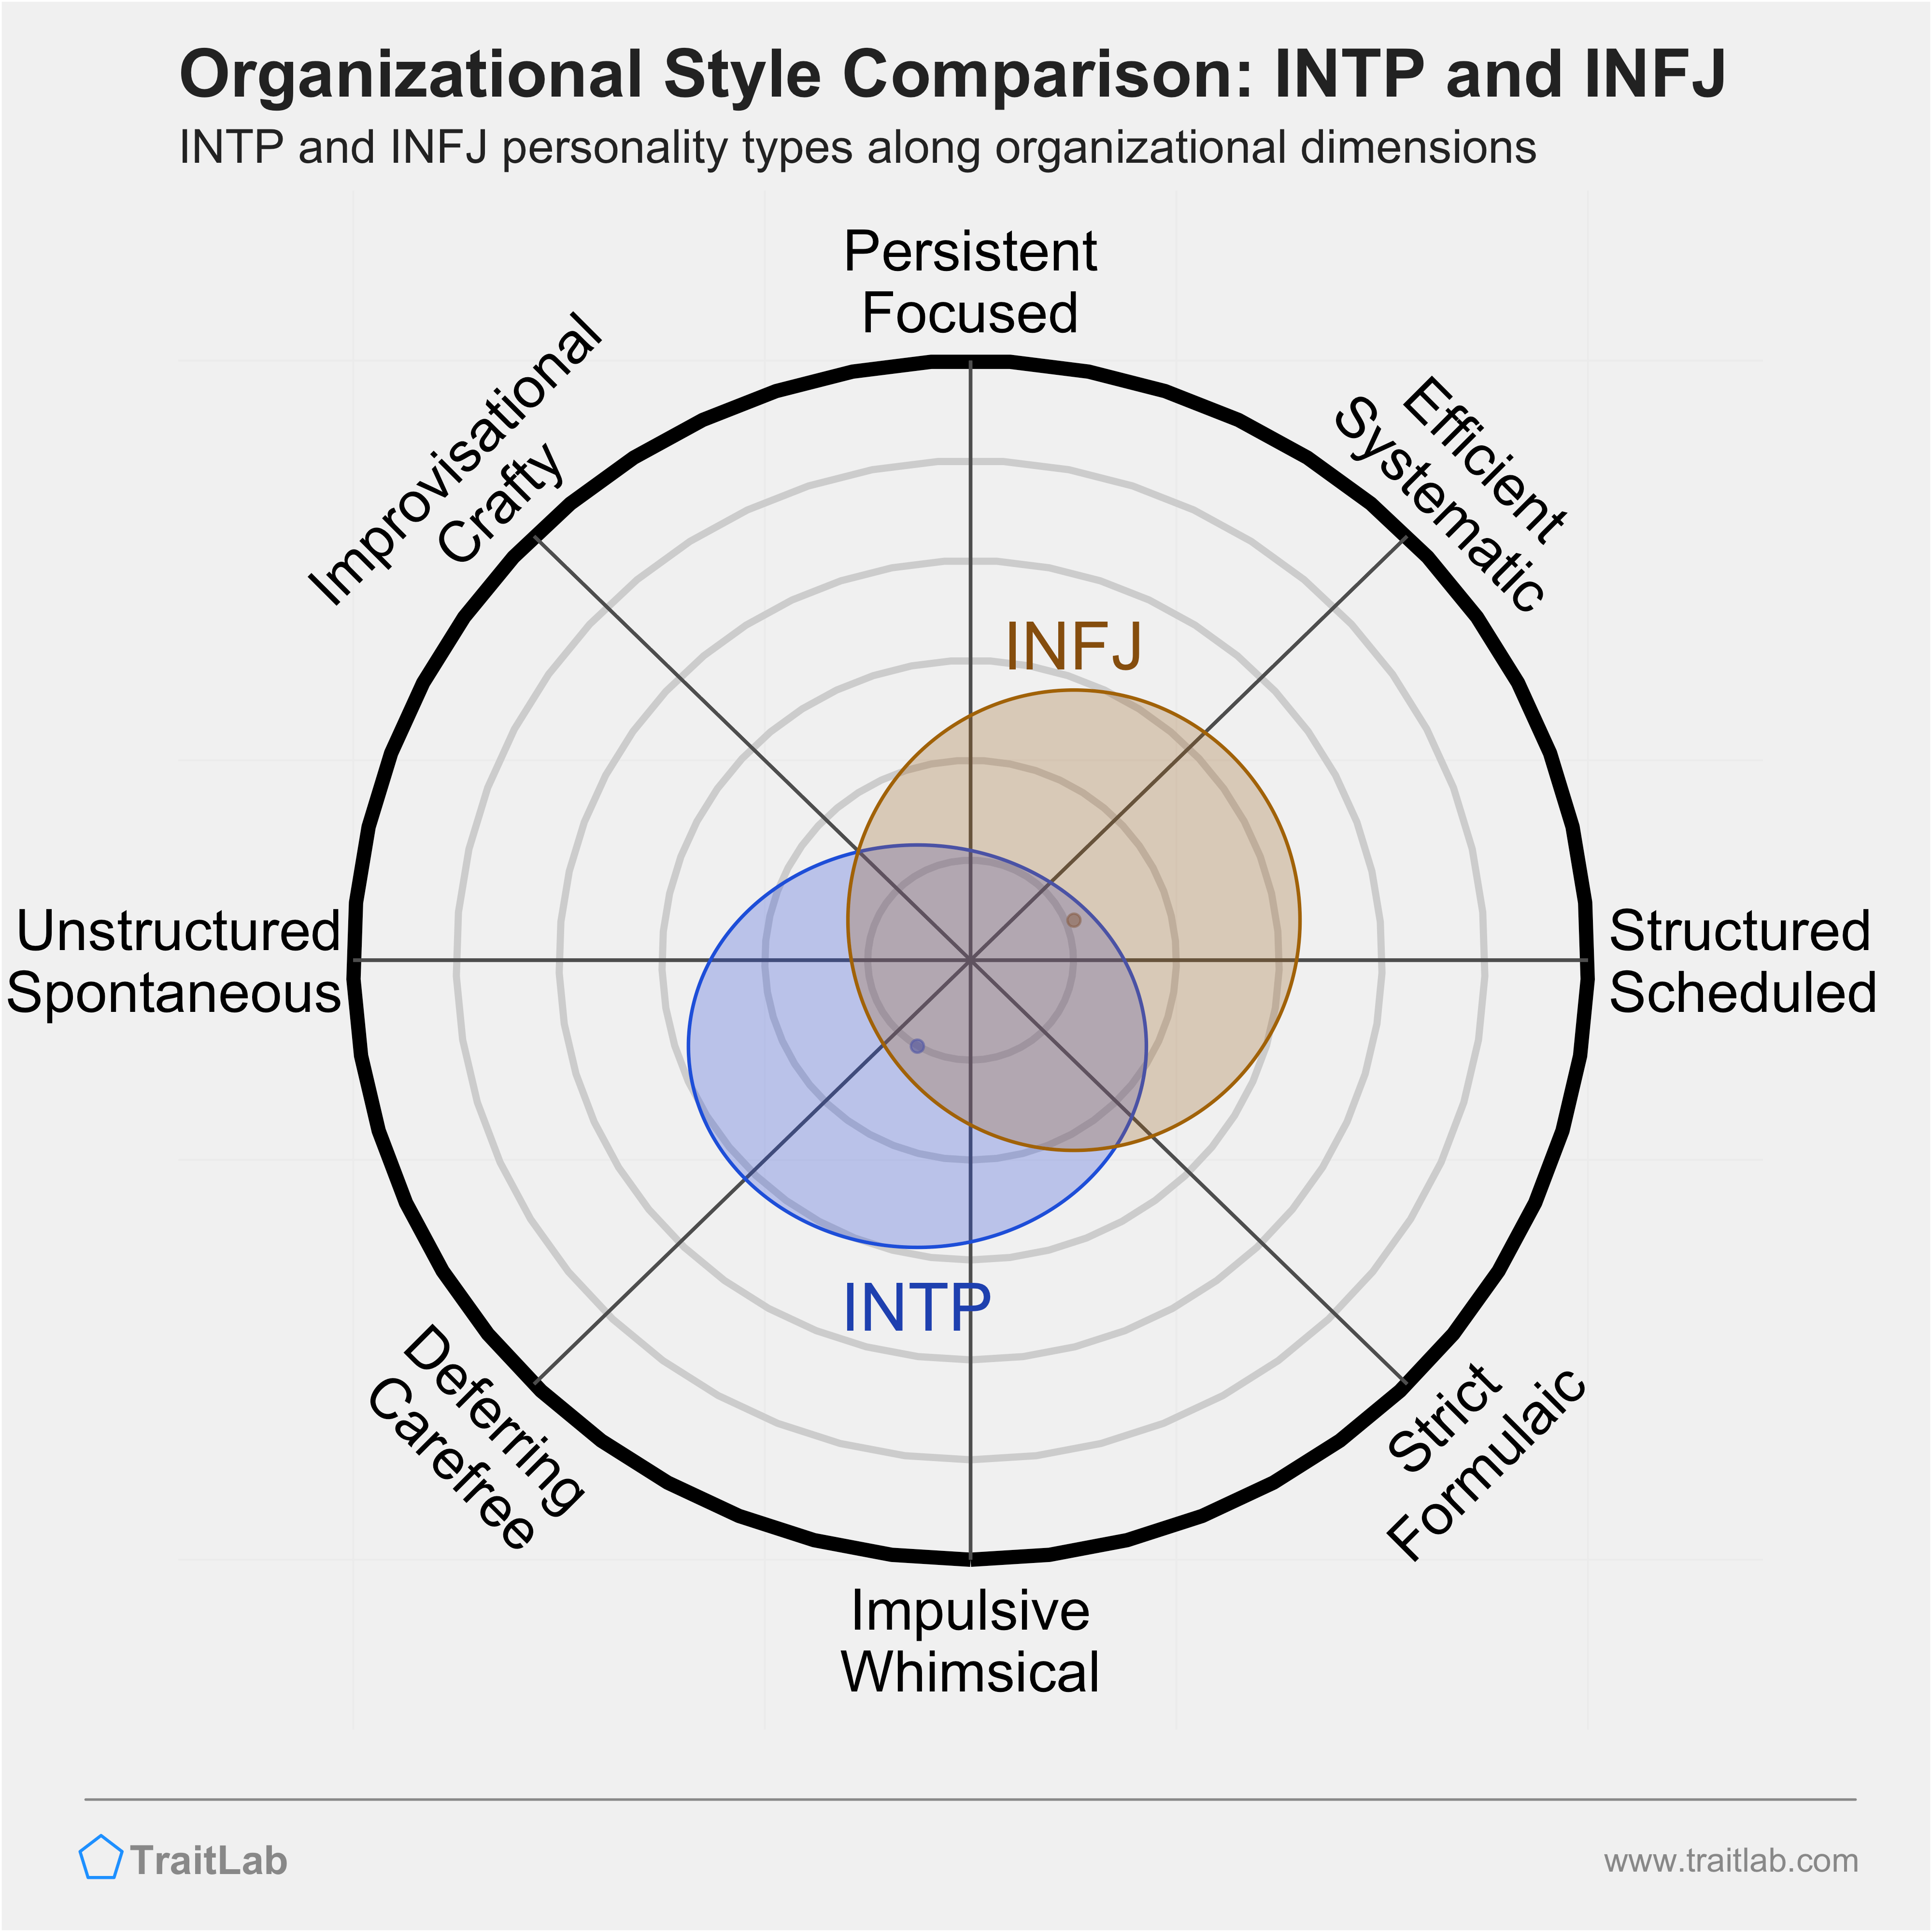 INTP and INFJ comparison across organizational dimensions